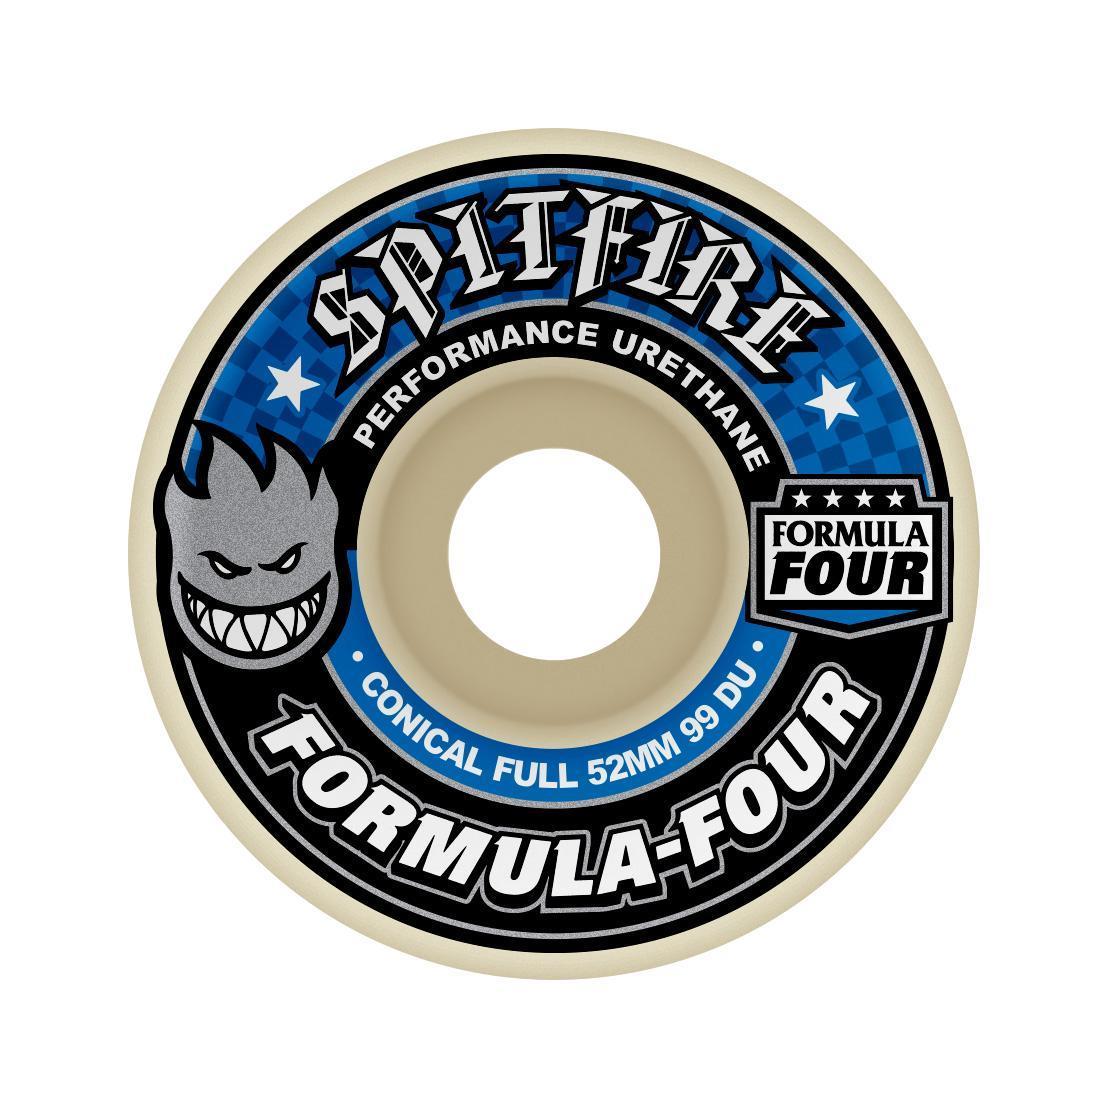 Spitfire F4 99a Conical Full 58mm - Venue Skateboards